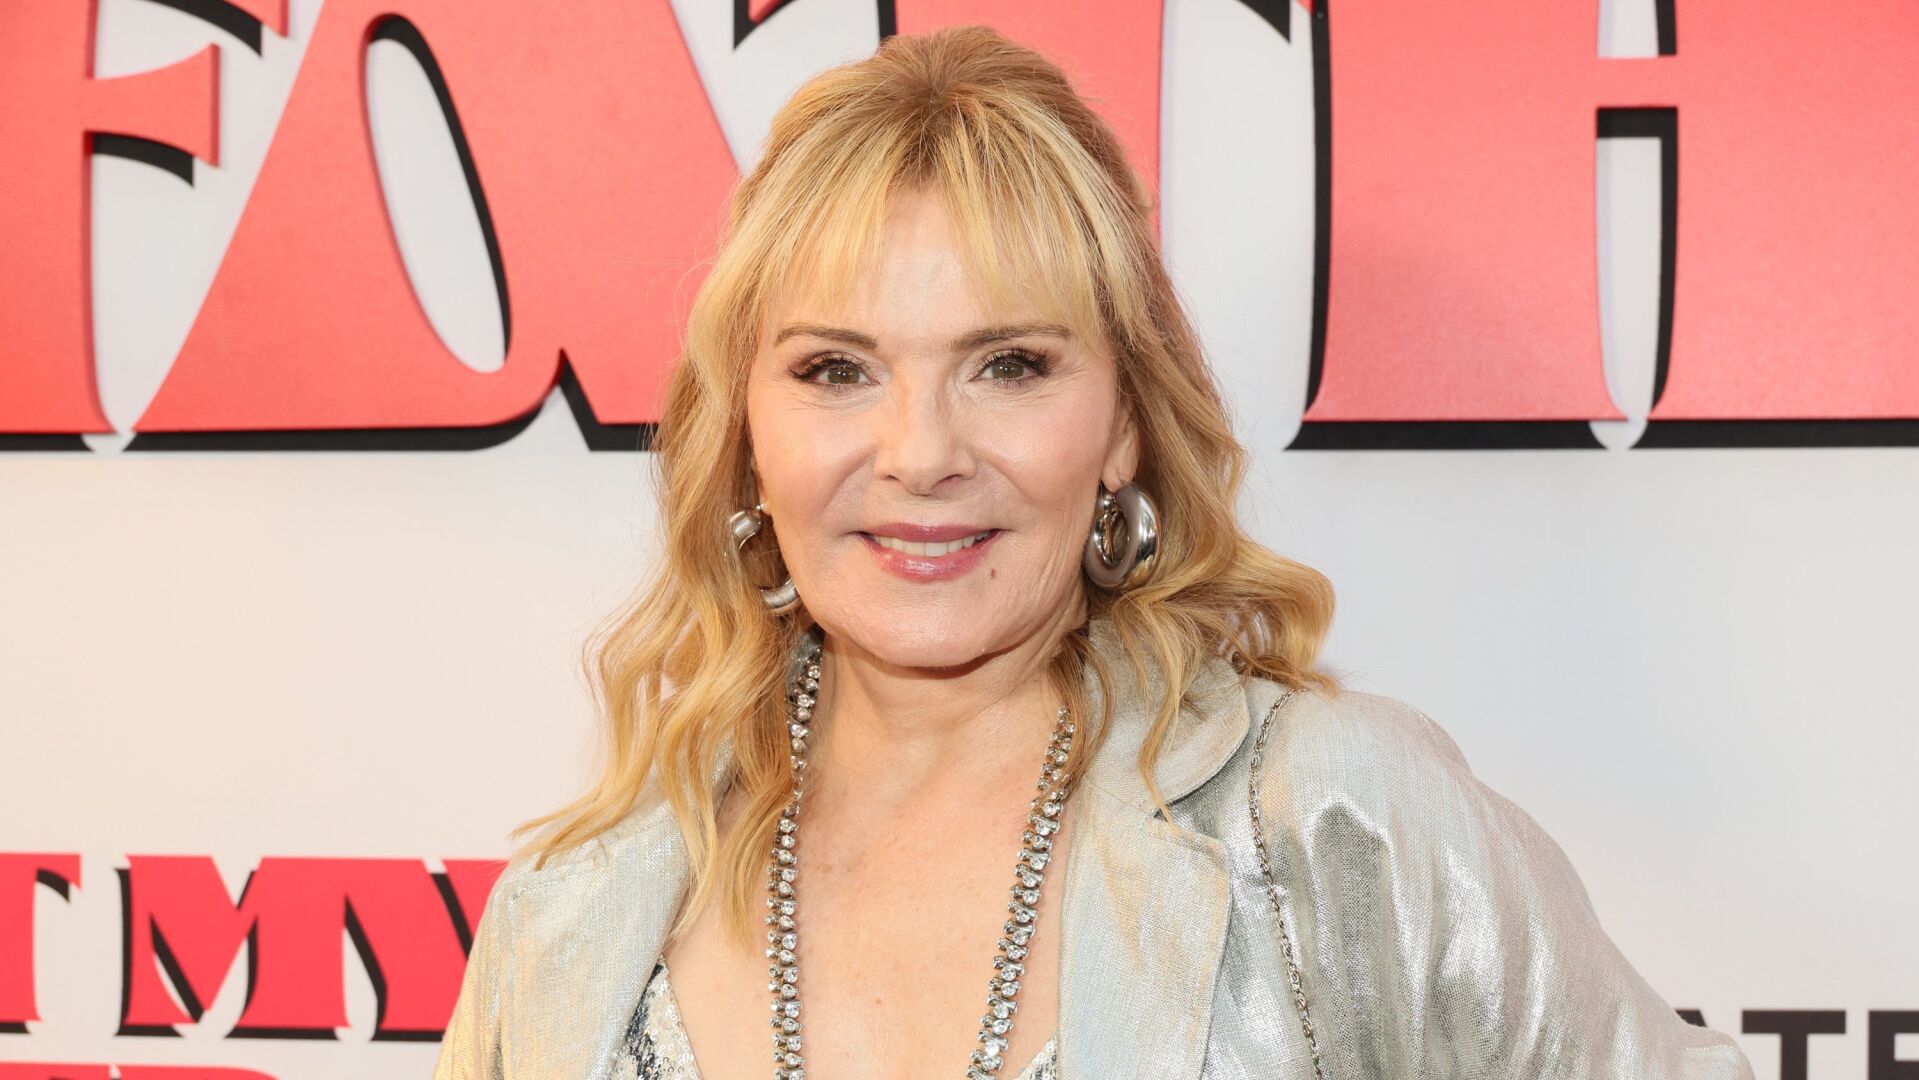 Kim Cattrall will indeed reprise the role of Samantha Jones in Sex and the City reboot National kdrv